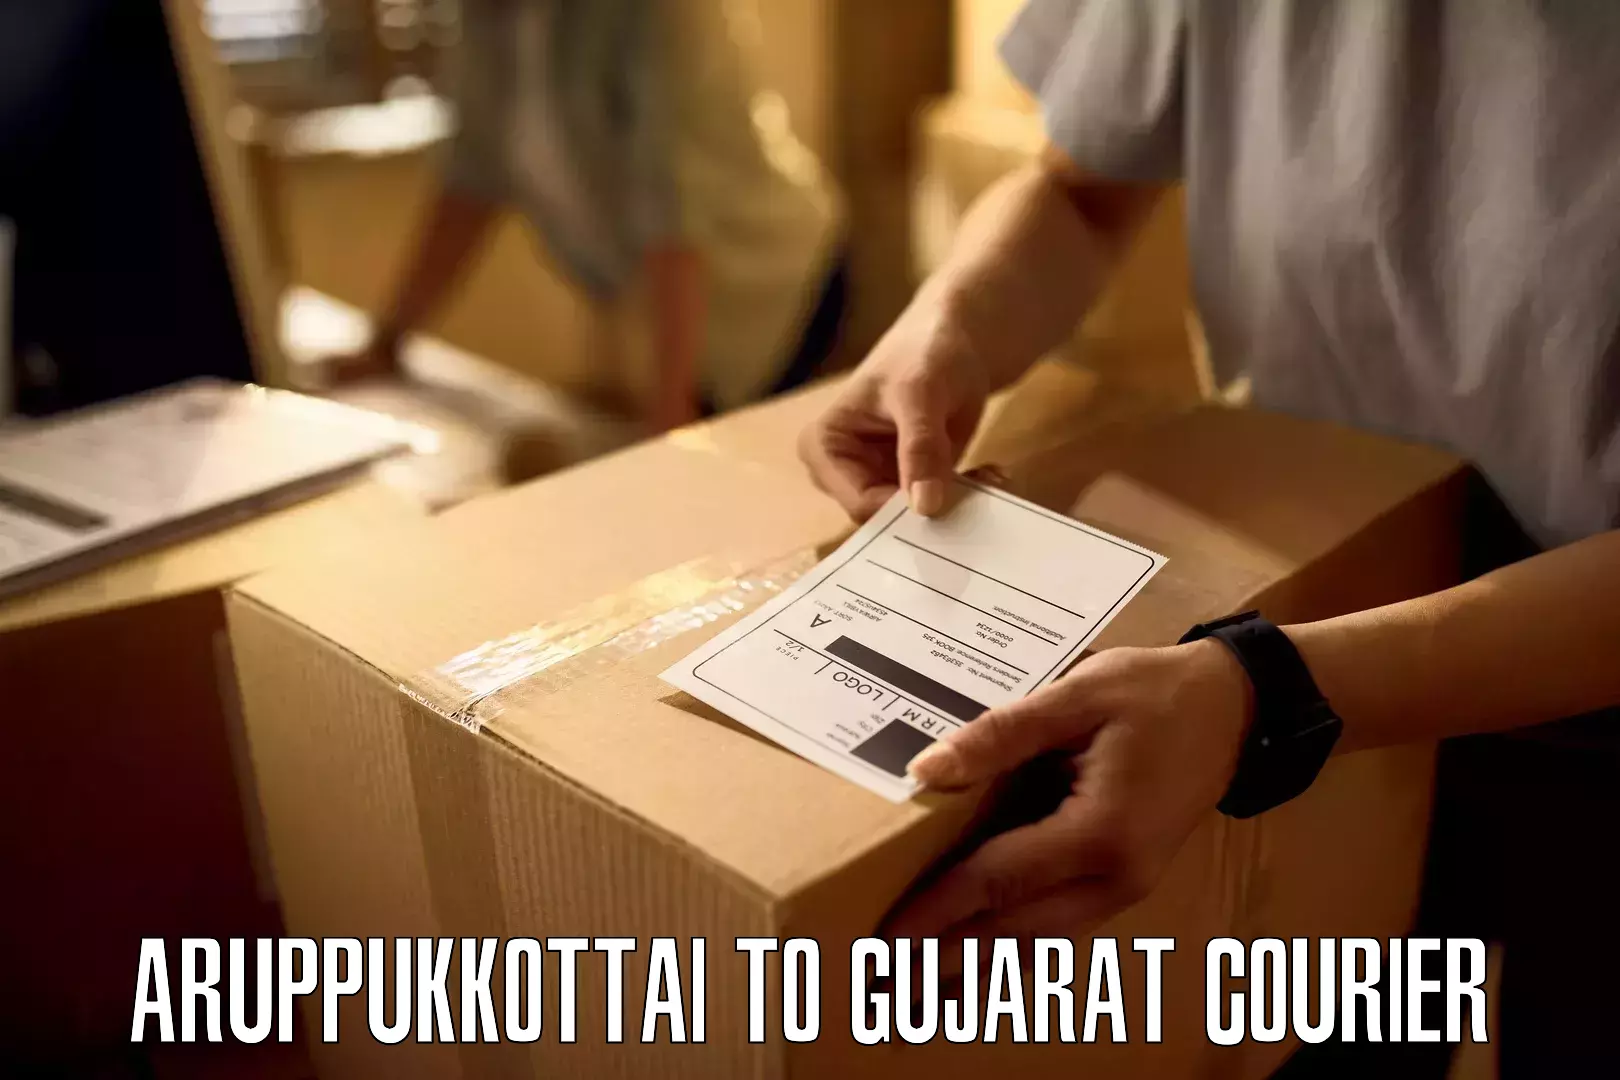 State-of-the-art courier technology Aruppukkottai to Fateganj